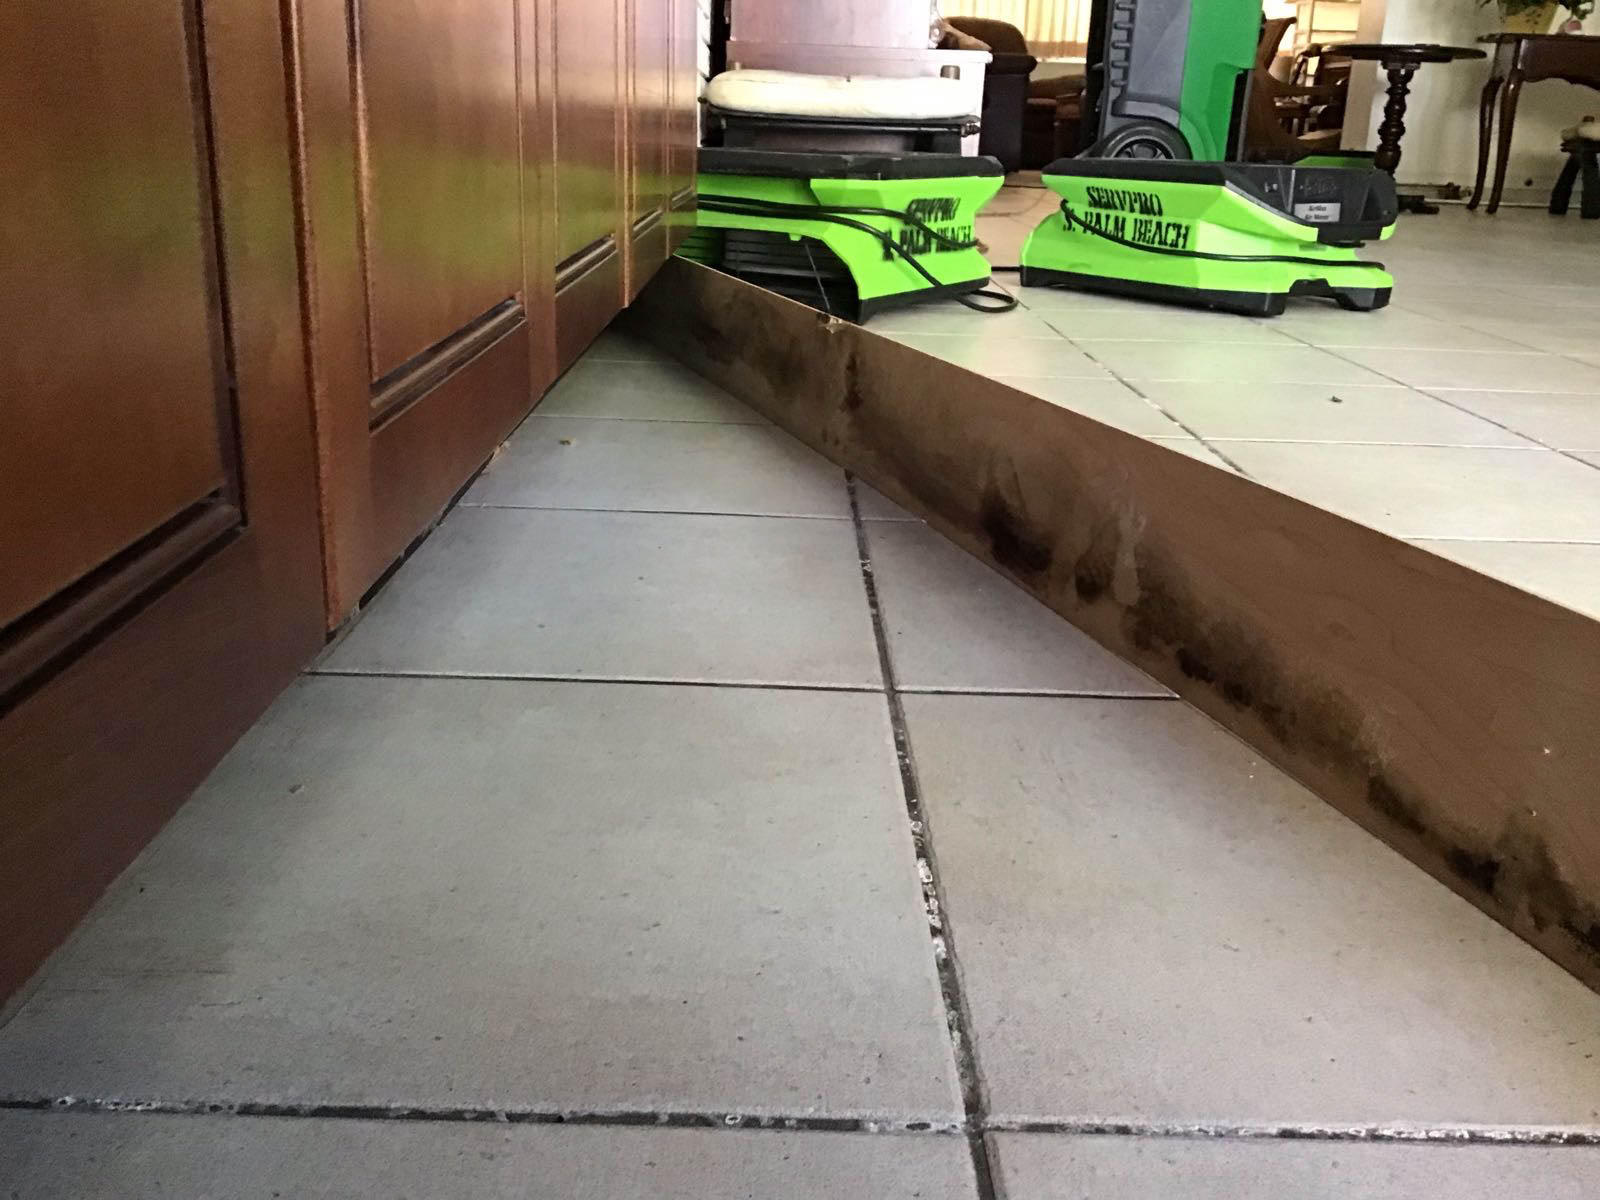 If you suspect mold damage in your Deerfield Beach, FL home or business give SERVPRO of Deerfield Be SERVPRO of Deerfield Beach Boca Raton (954)596-2208